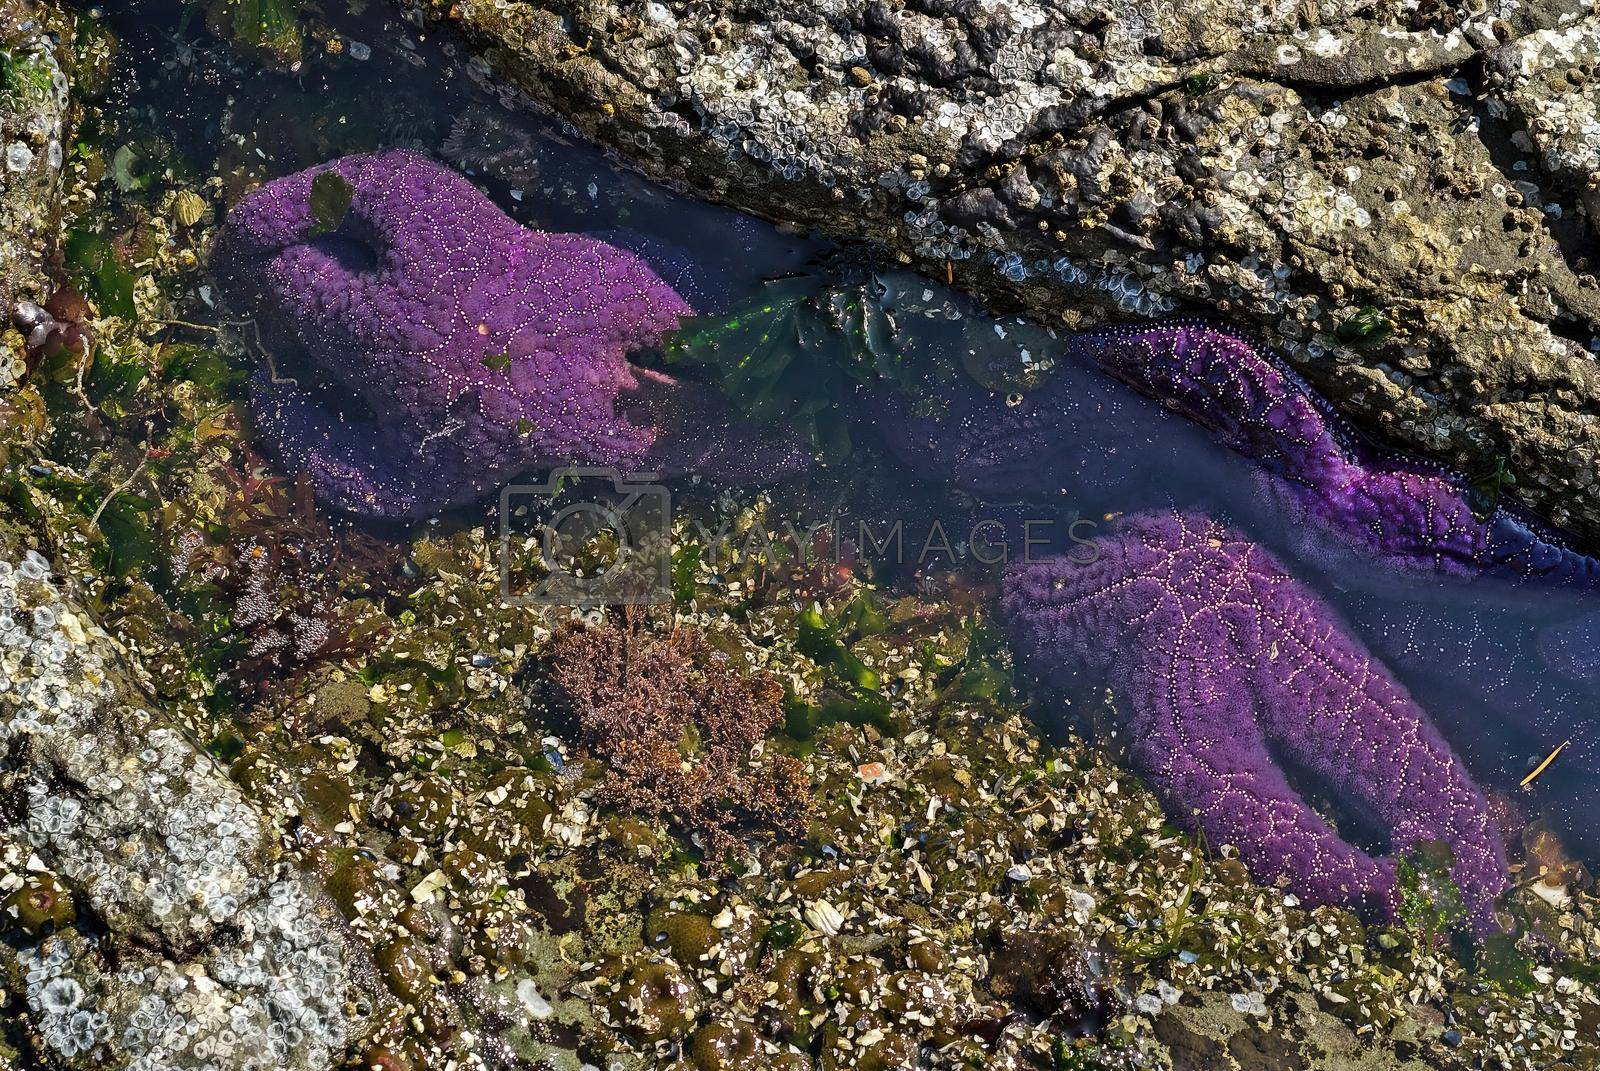 Royalty free image of Purple Starfish or Sea Stars in a Tide Pool on Vancouver Island by markvandam